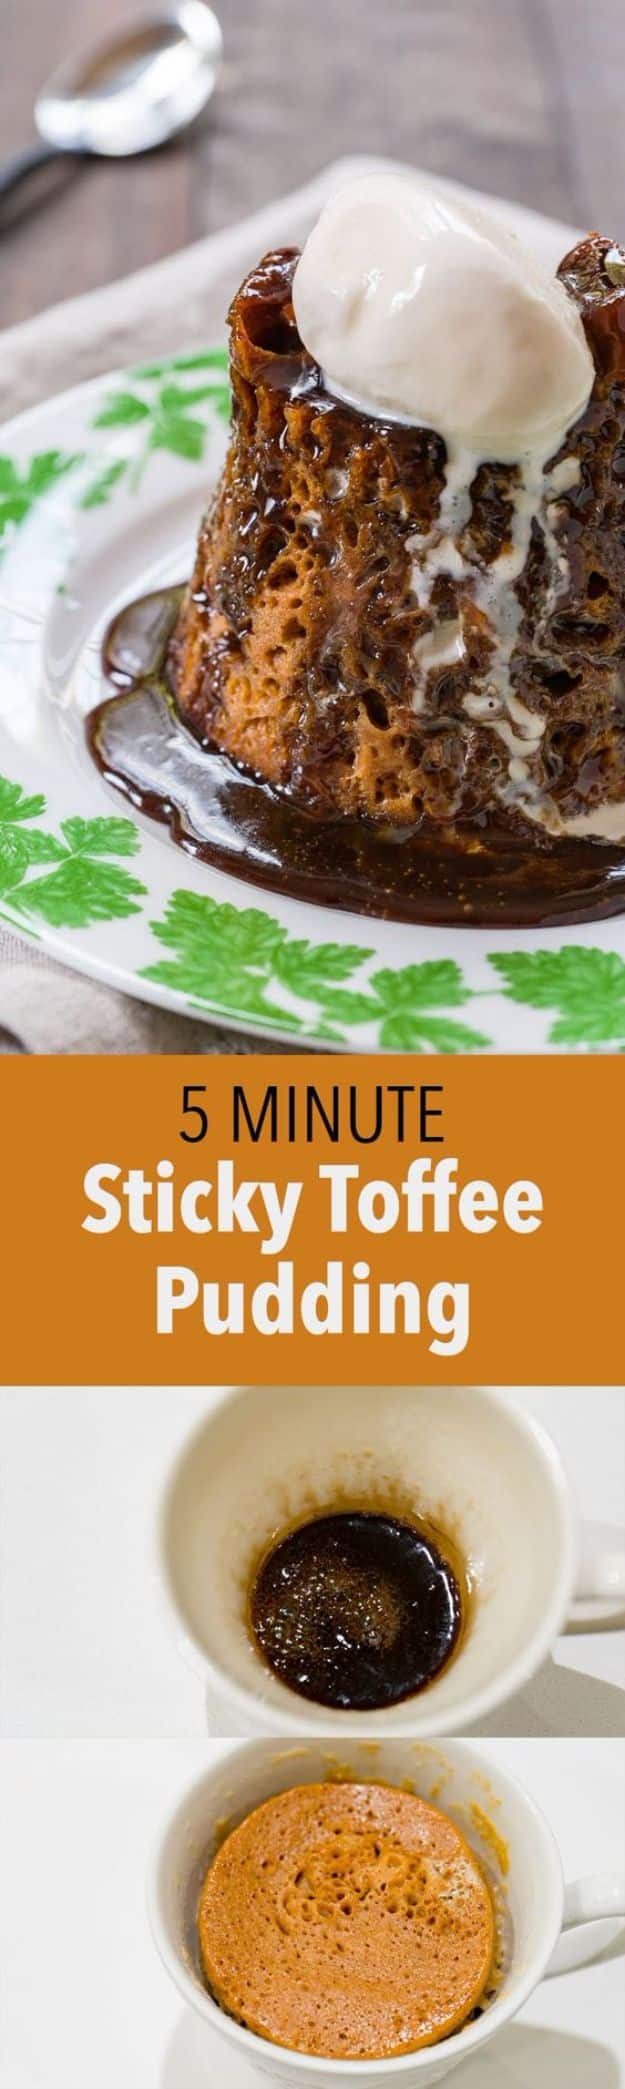 Quick Dessert Recipes - 5-Minute Sticky Toffee Pudding Recipe - Fast Desserts to Make In Minutes - Sweet Treats, Cookies, Cake and Snack Ideas